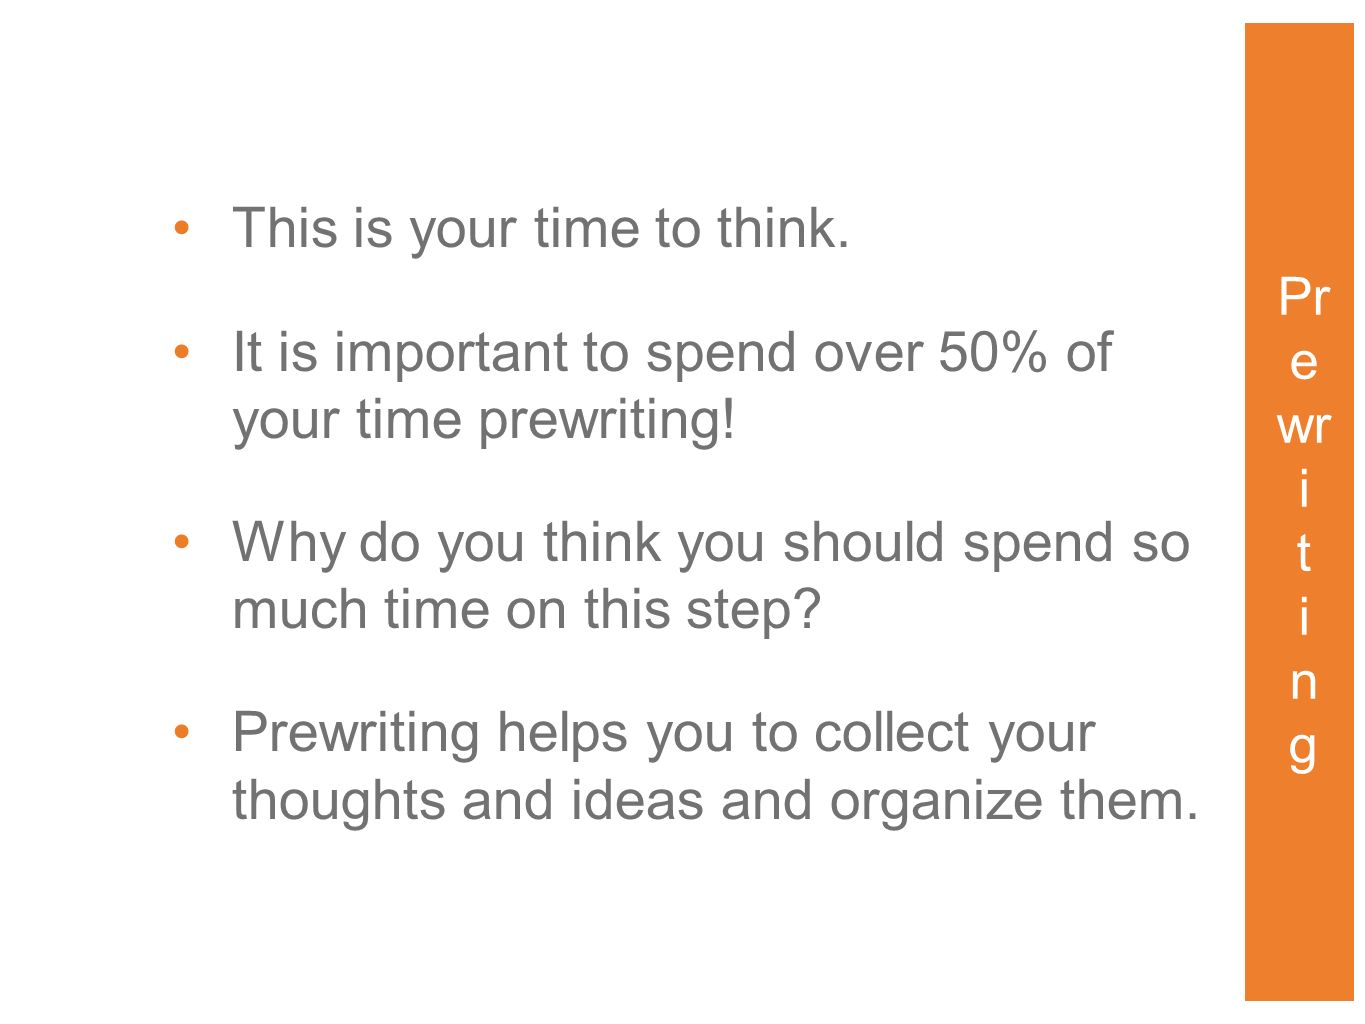 This is your time to think. It is important to spend over 50% of your time prewriting.